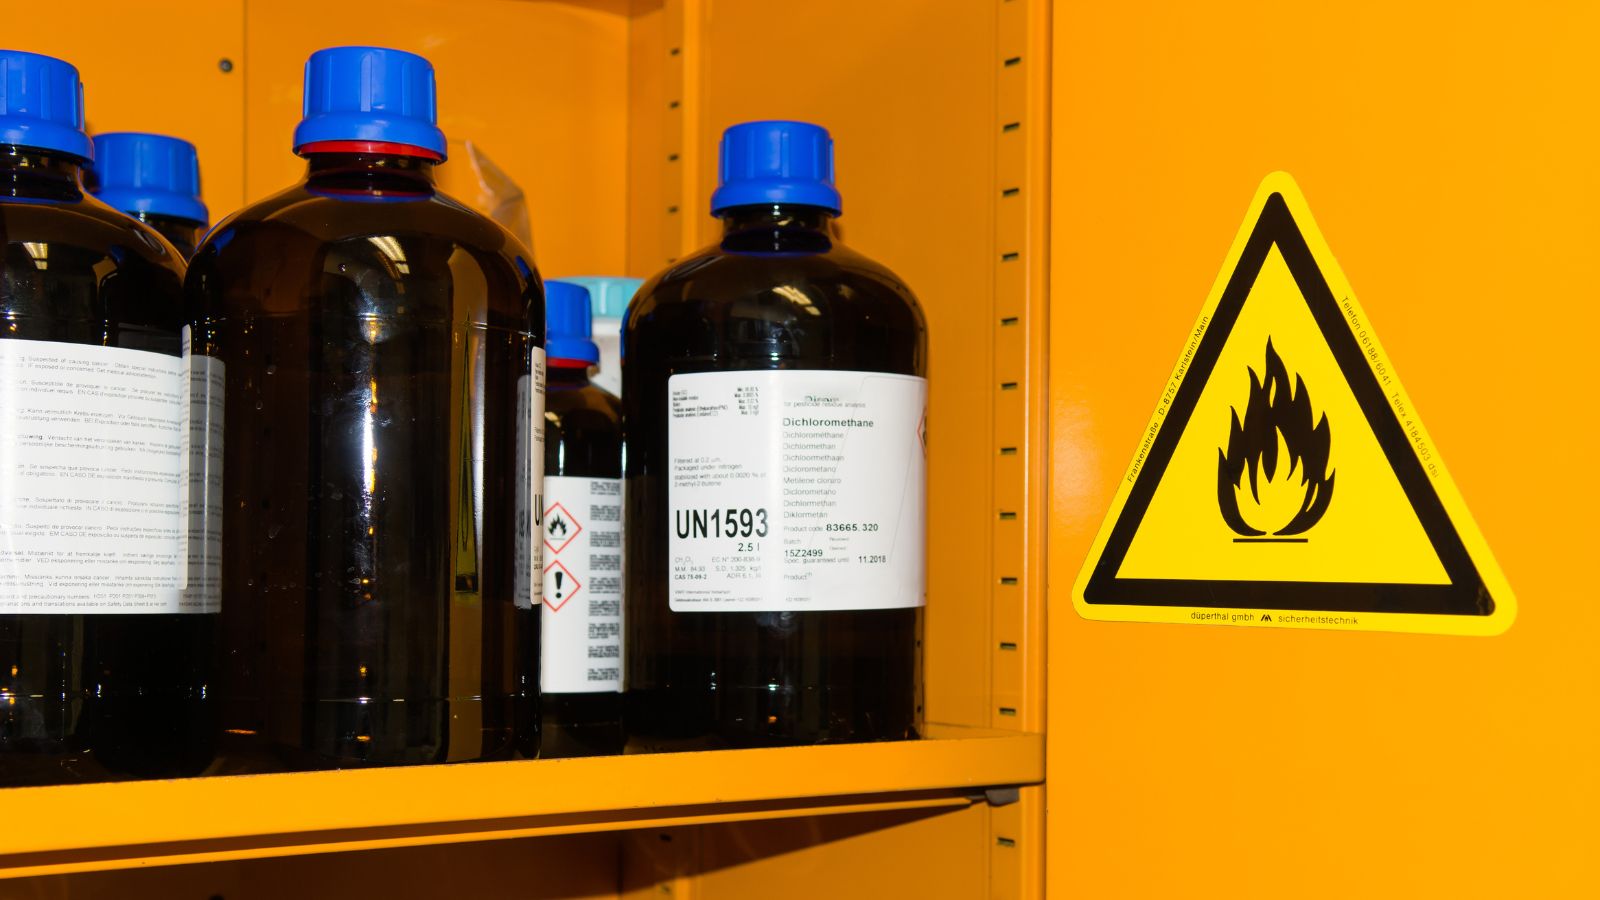 <p>In warm conditions, flammable liquids evaporate faster, making them more volatile and posing a significant fire hazard. Never store anything flammable near a heat source—even a low-key one like a refrigerator! Instead, place them in designated safety containers, away from warmth and out of reach of children and pets.</p>